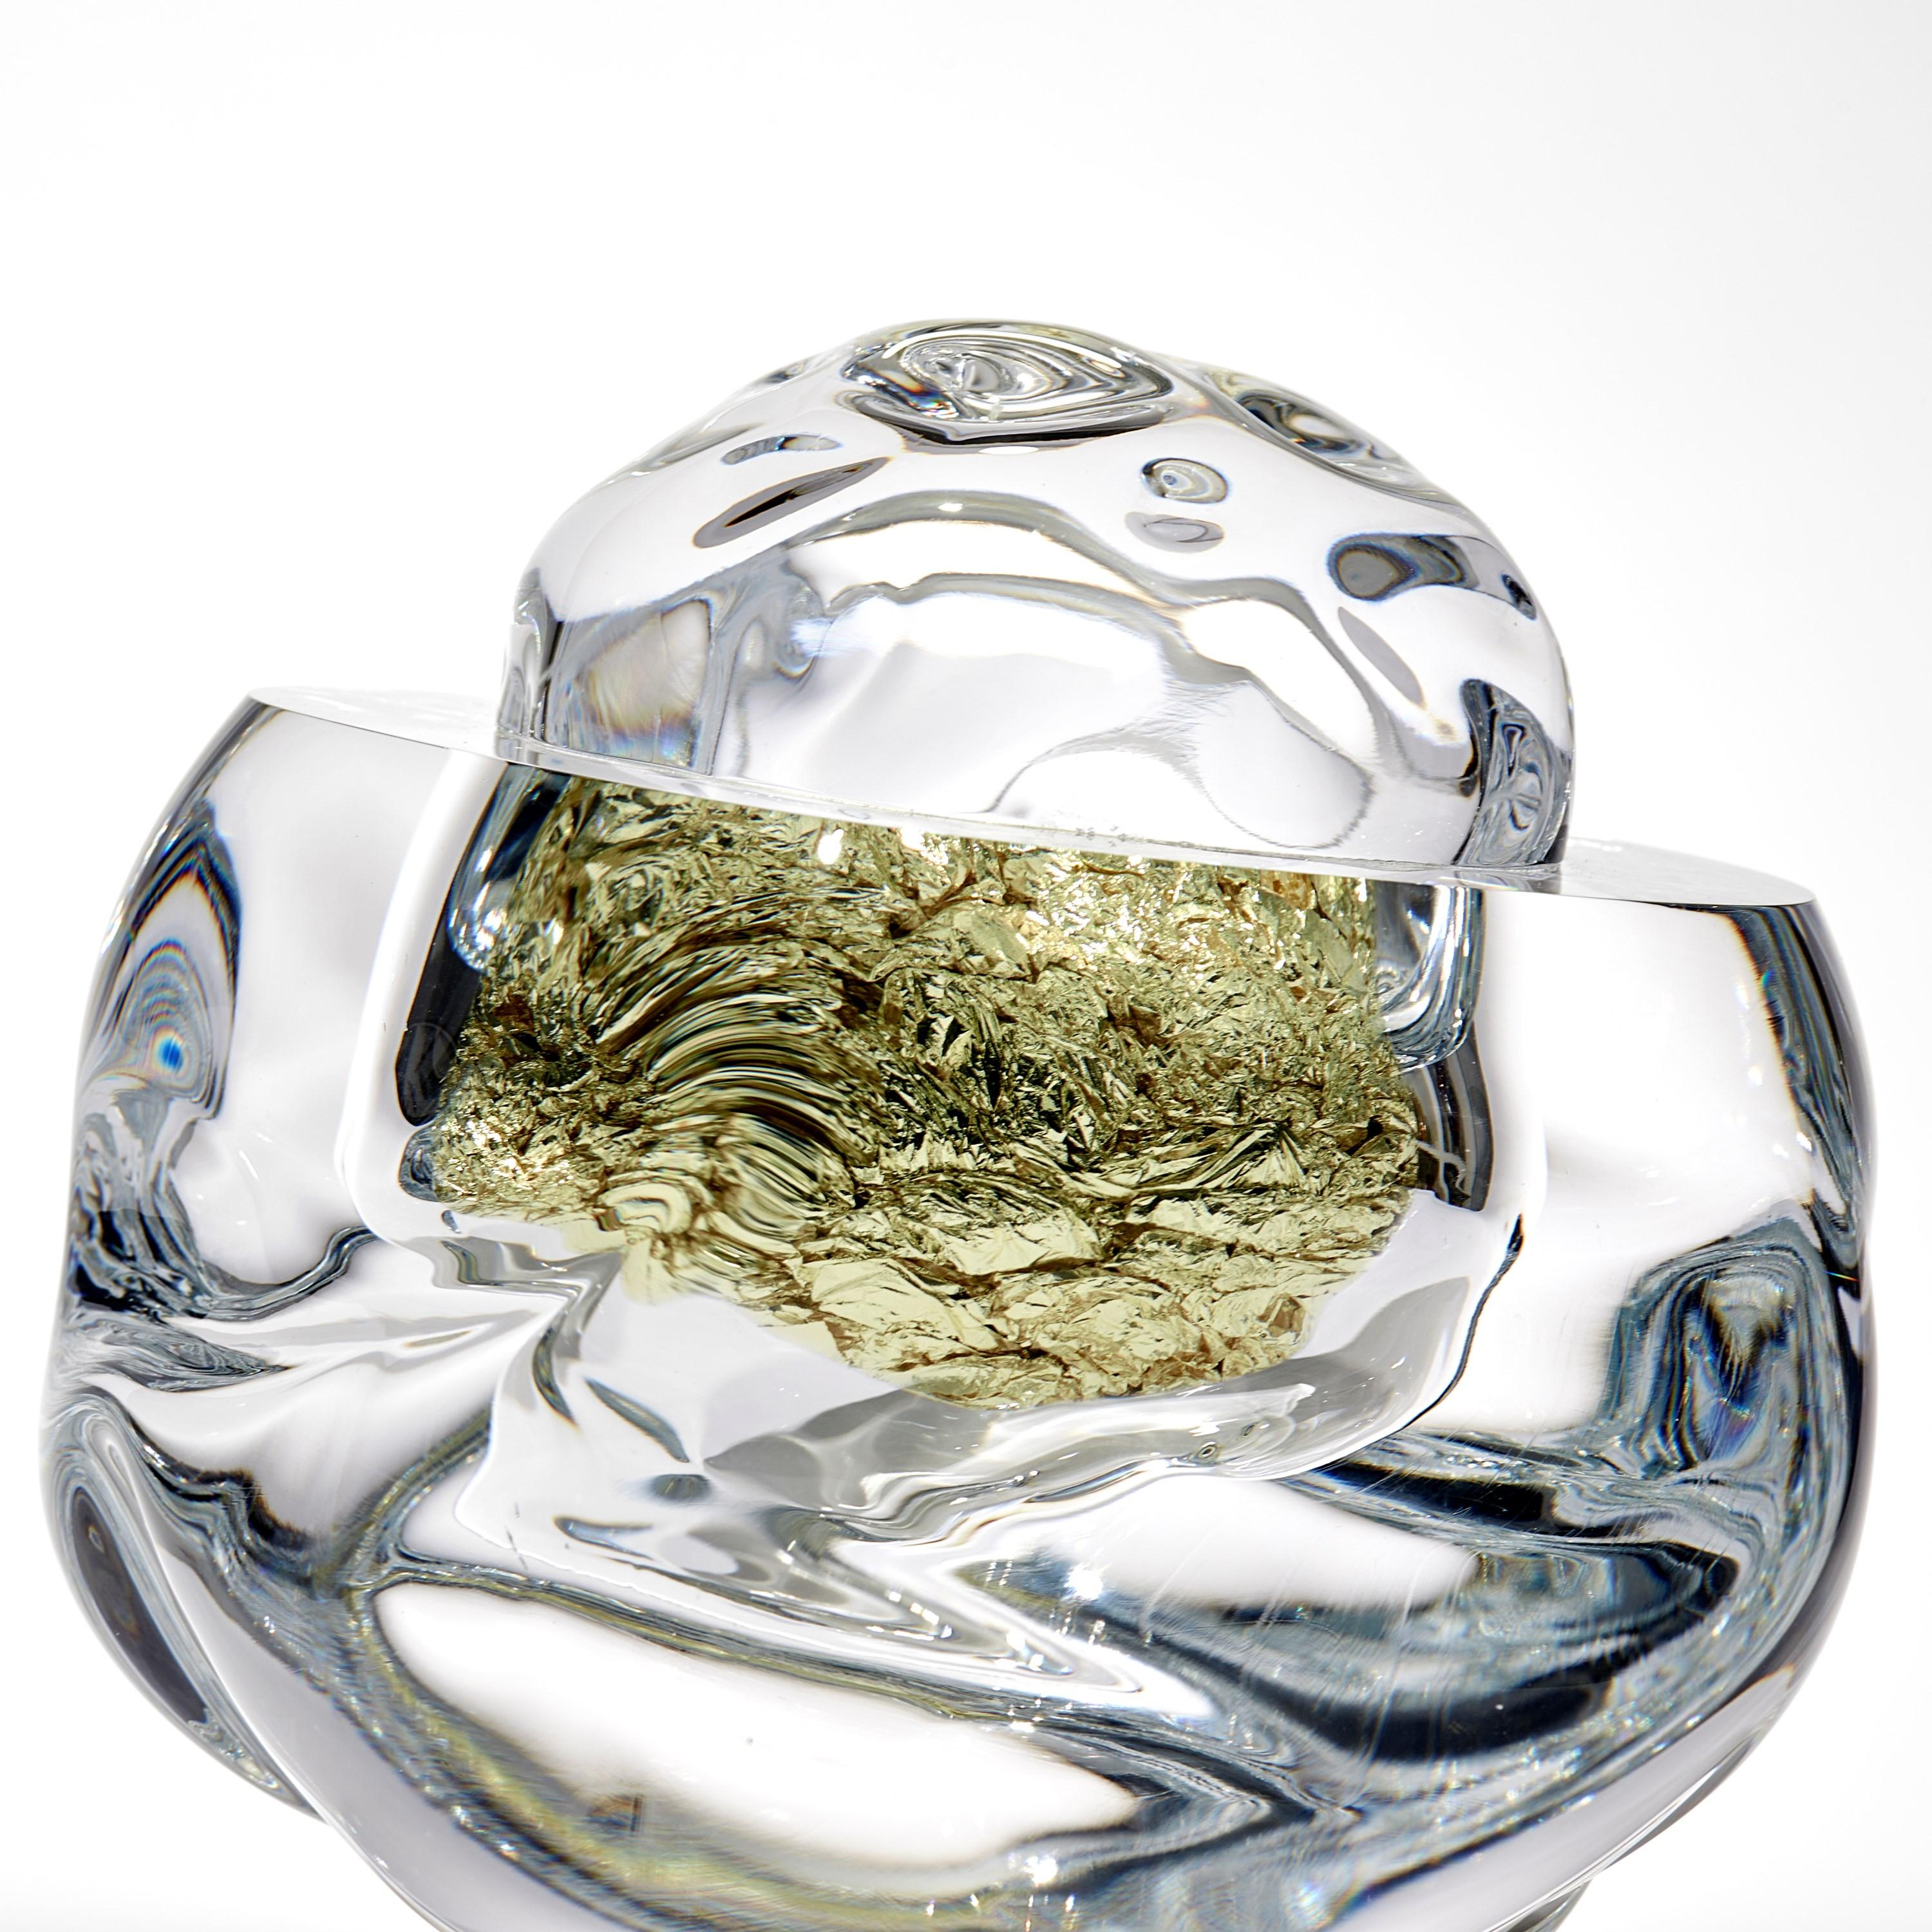 Contemporary Erratic J with 18ct Green Gold, amorphic optical glass artwork by Anthony Scala